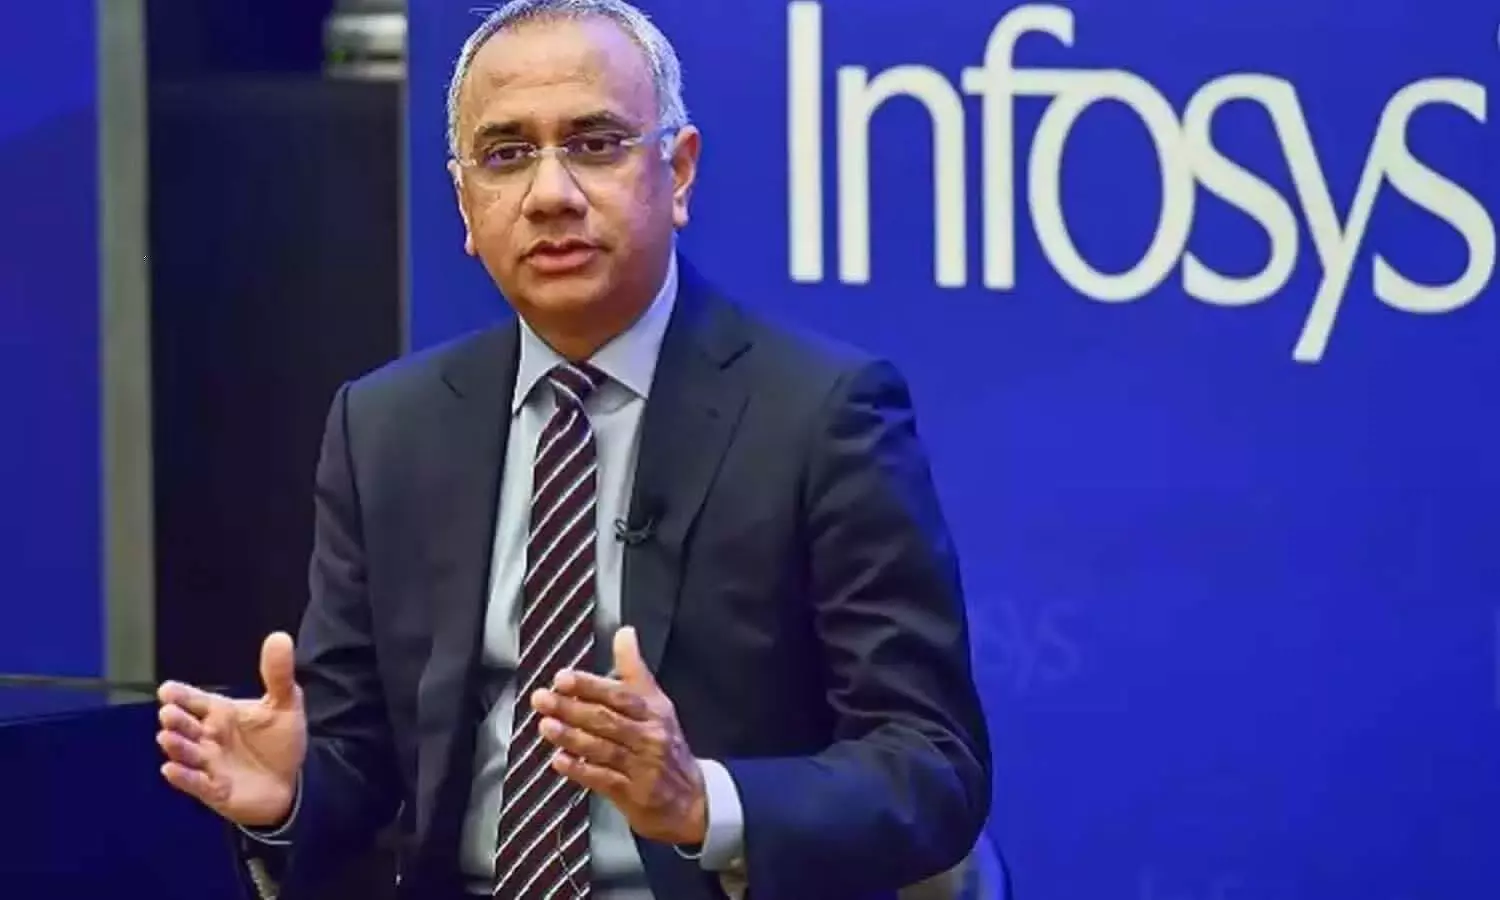 Infosys re-appoints Salil Parekh as CEO and MD for the next 5 years